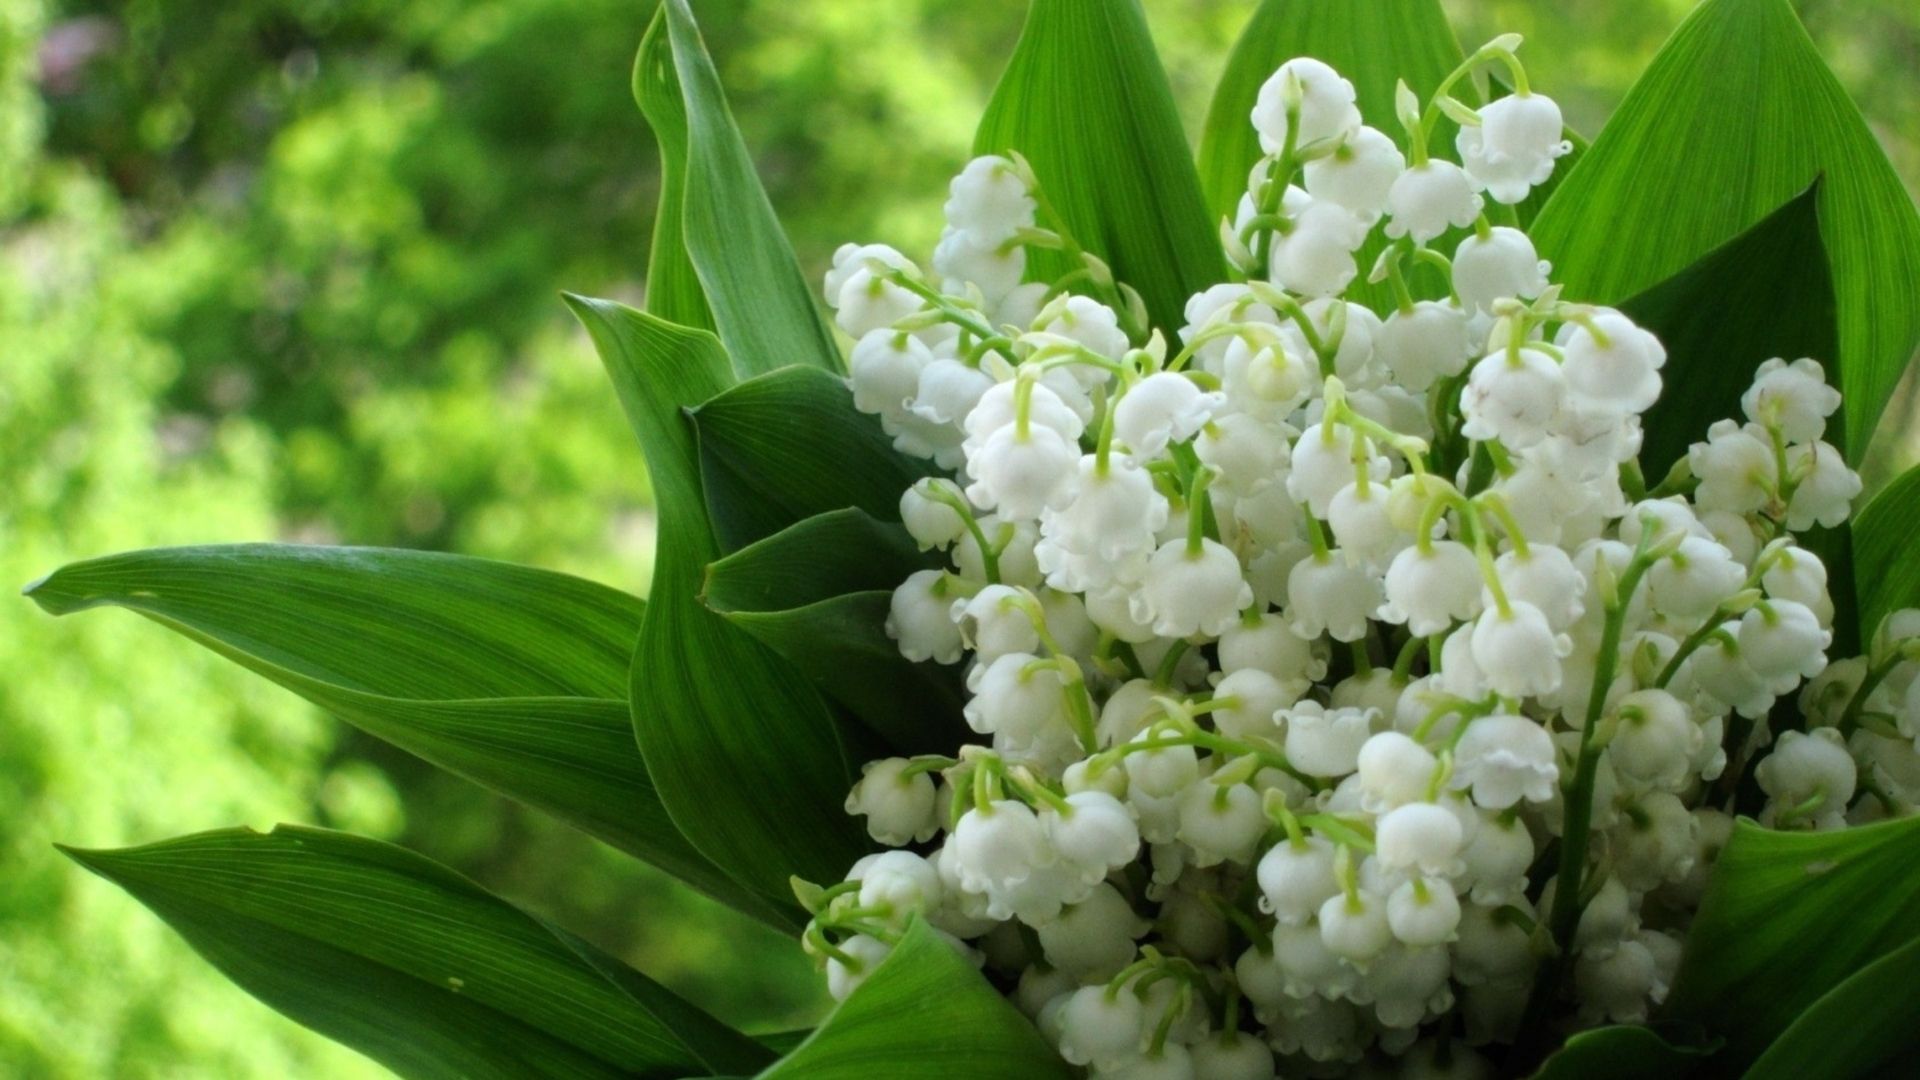 Lily Of The Valley Wallpaper